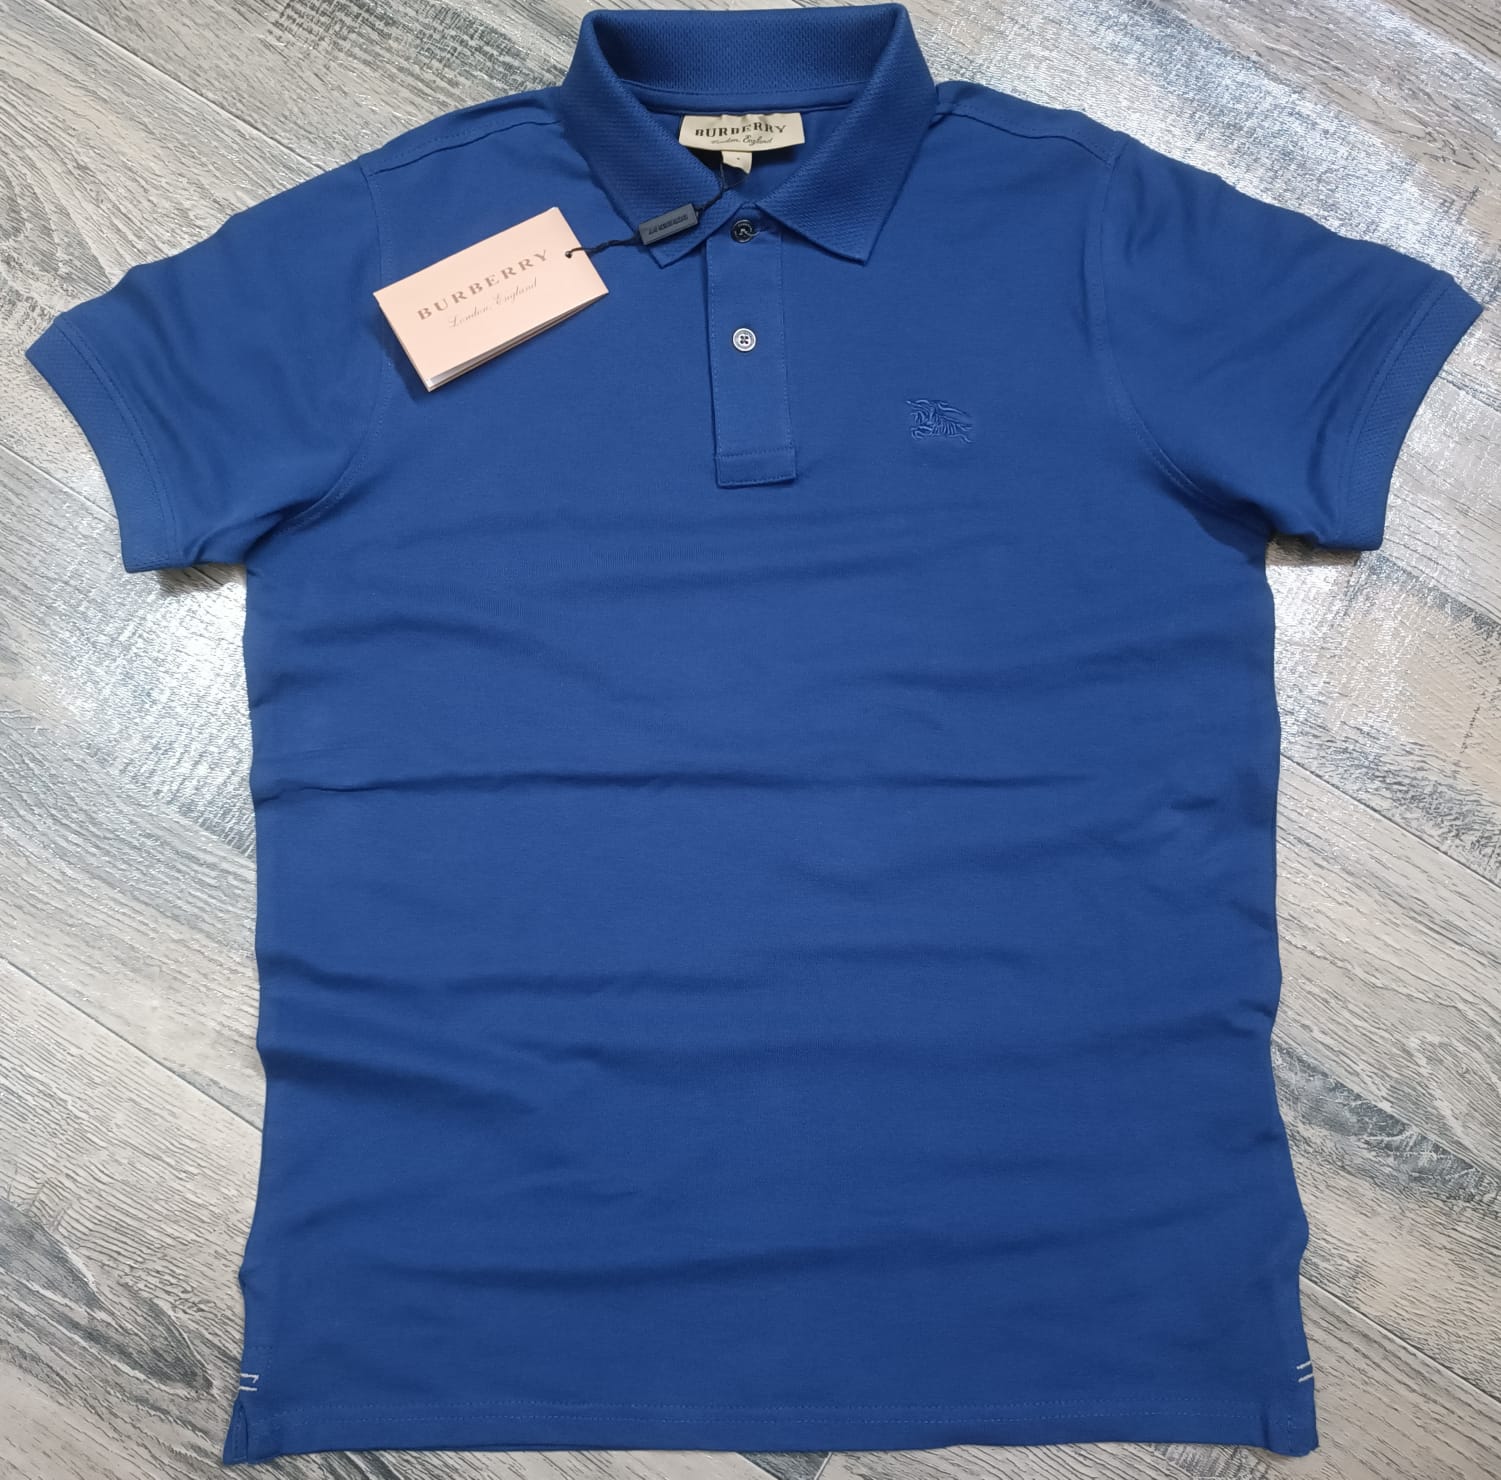 Imported Super Premium Cotton Polo Shirt For Men (ZAYSIPS02) - Blue